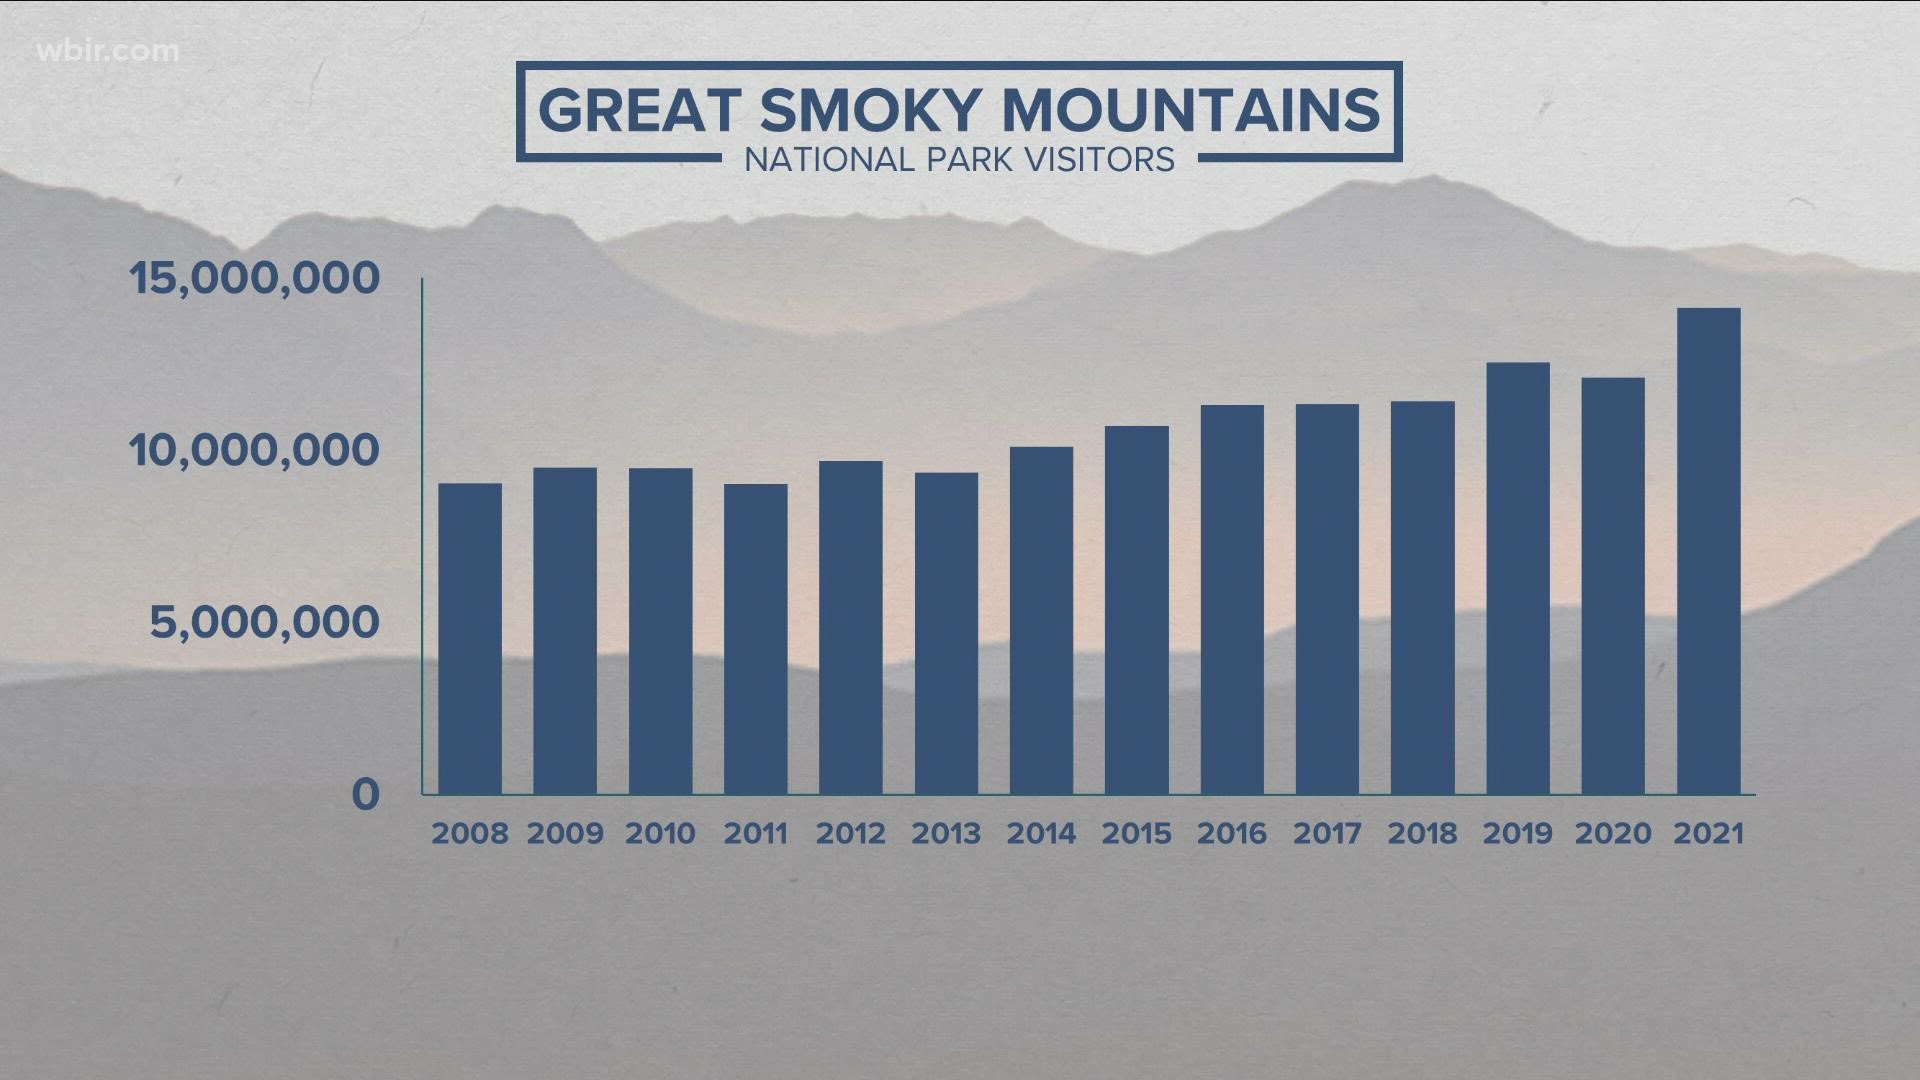 Officials said that the Great Smoky Mountains had the busiest year on record with 14,137,812 visits — exceeding 2019's record by 1.5 million visits.